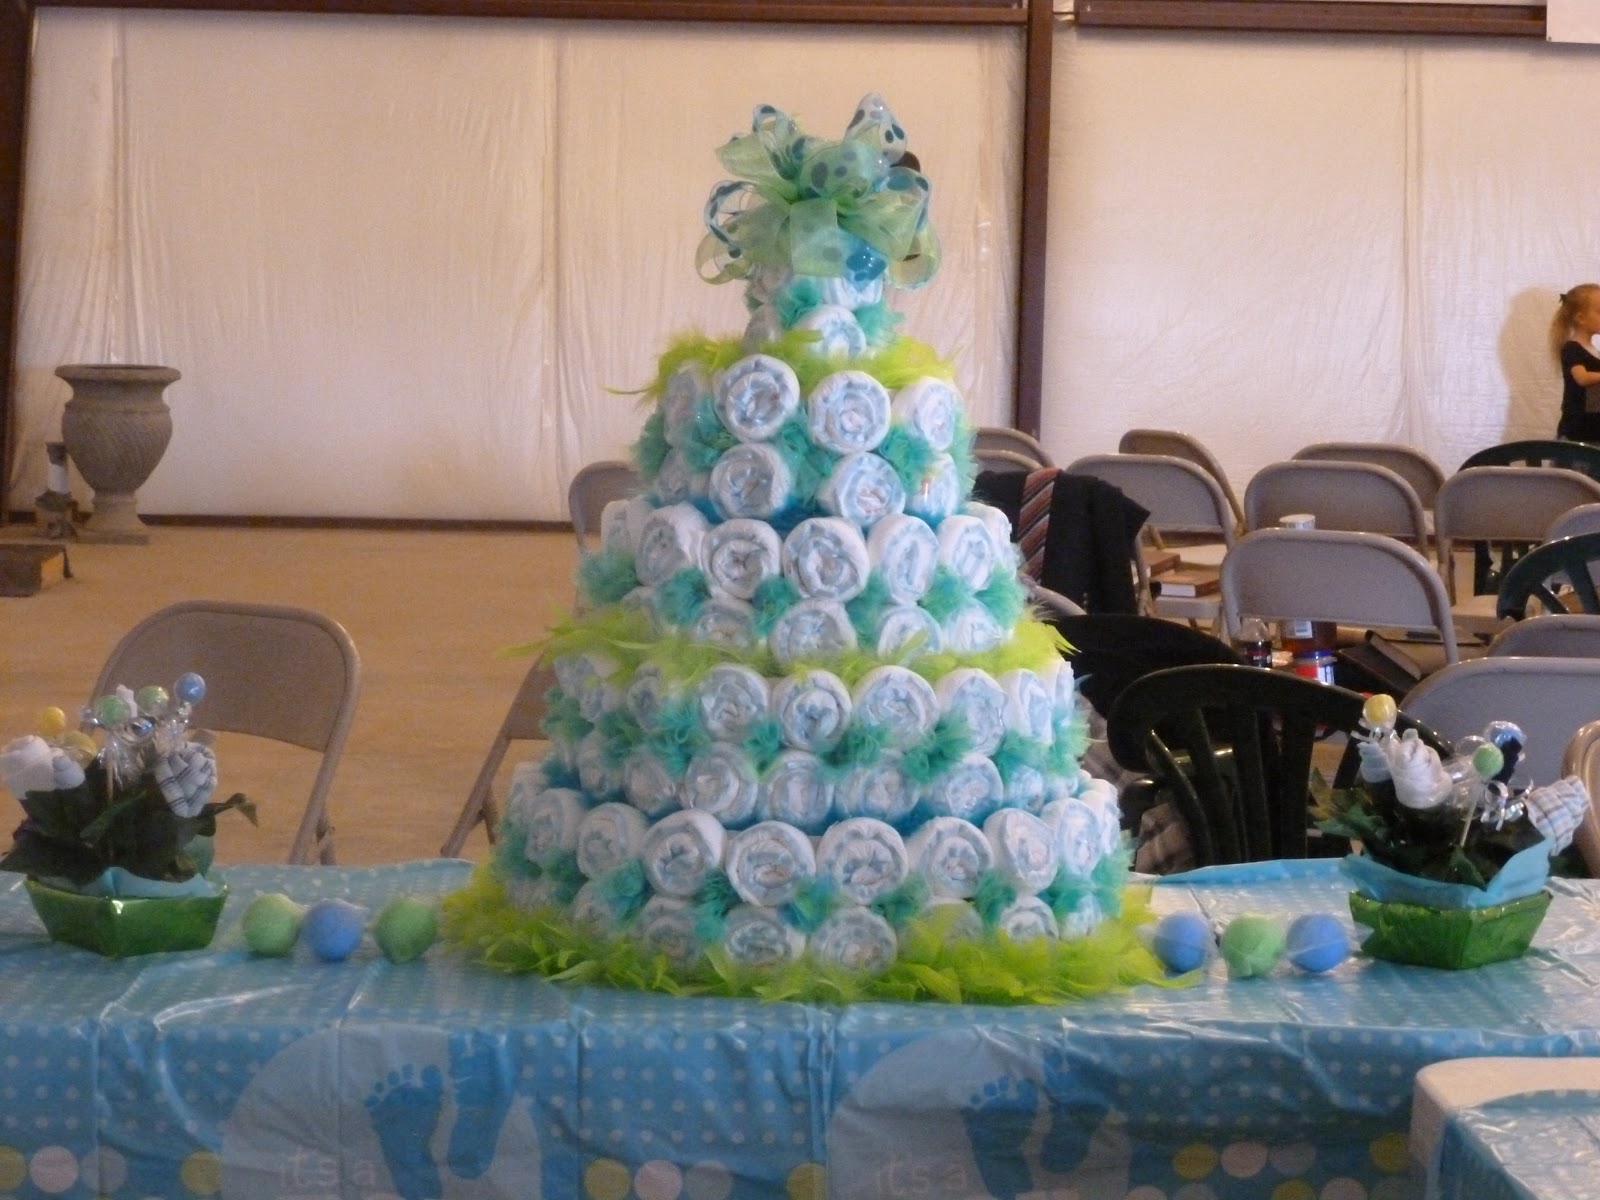 At the Fence: Baby Shower Kickoff! Vick's Starry Night Humidifier!